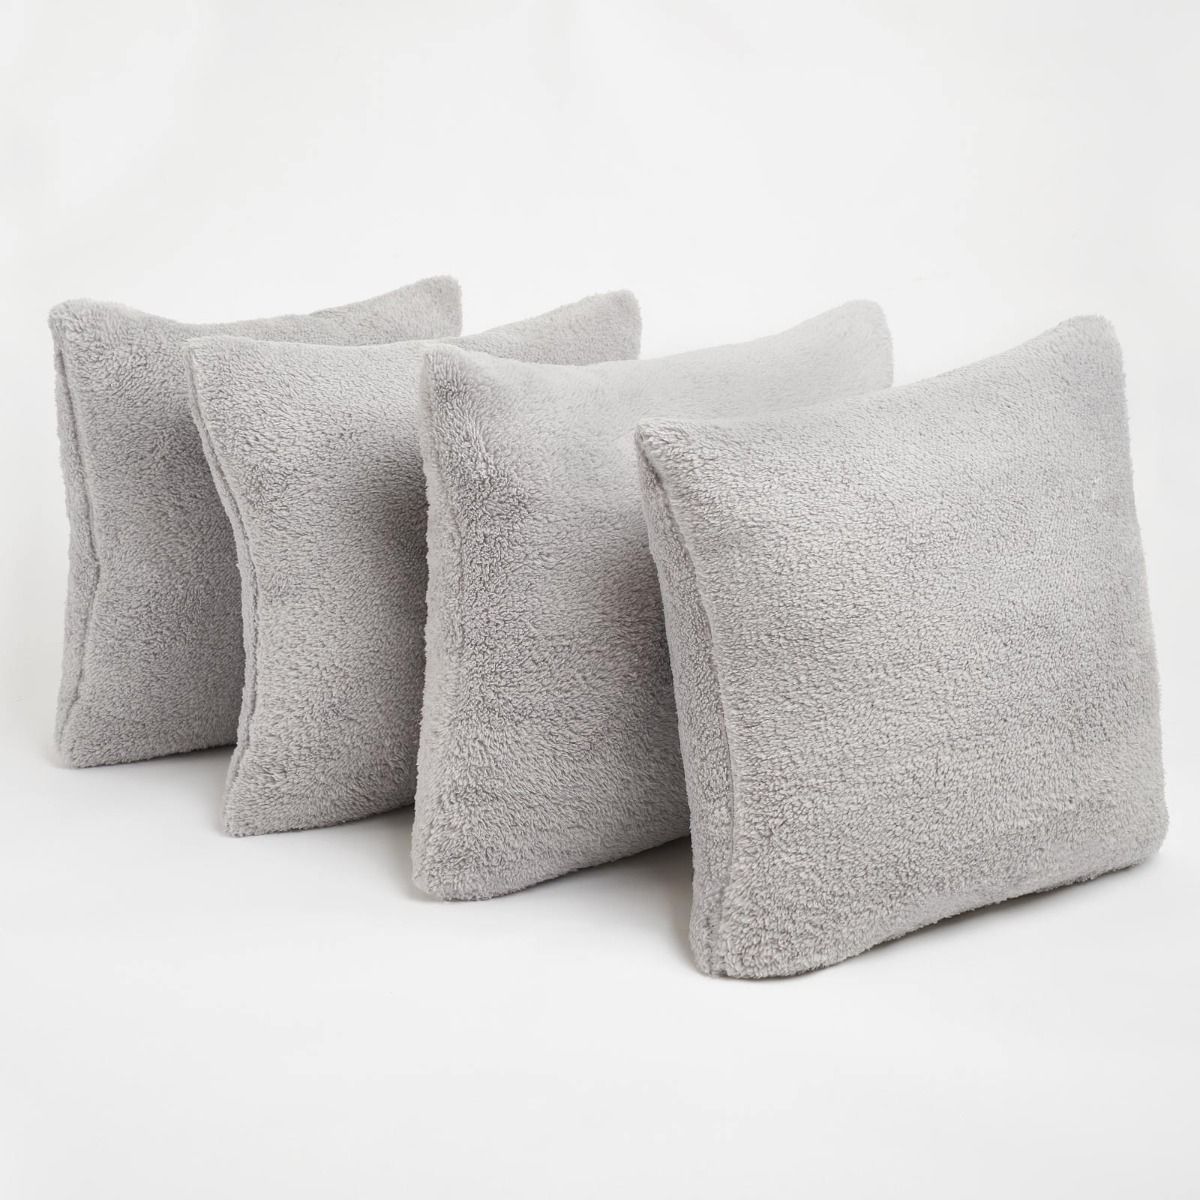 Brentfords 4 Pack Teddy Cushion Covers - Silver